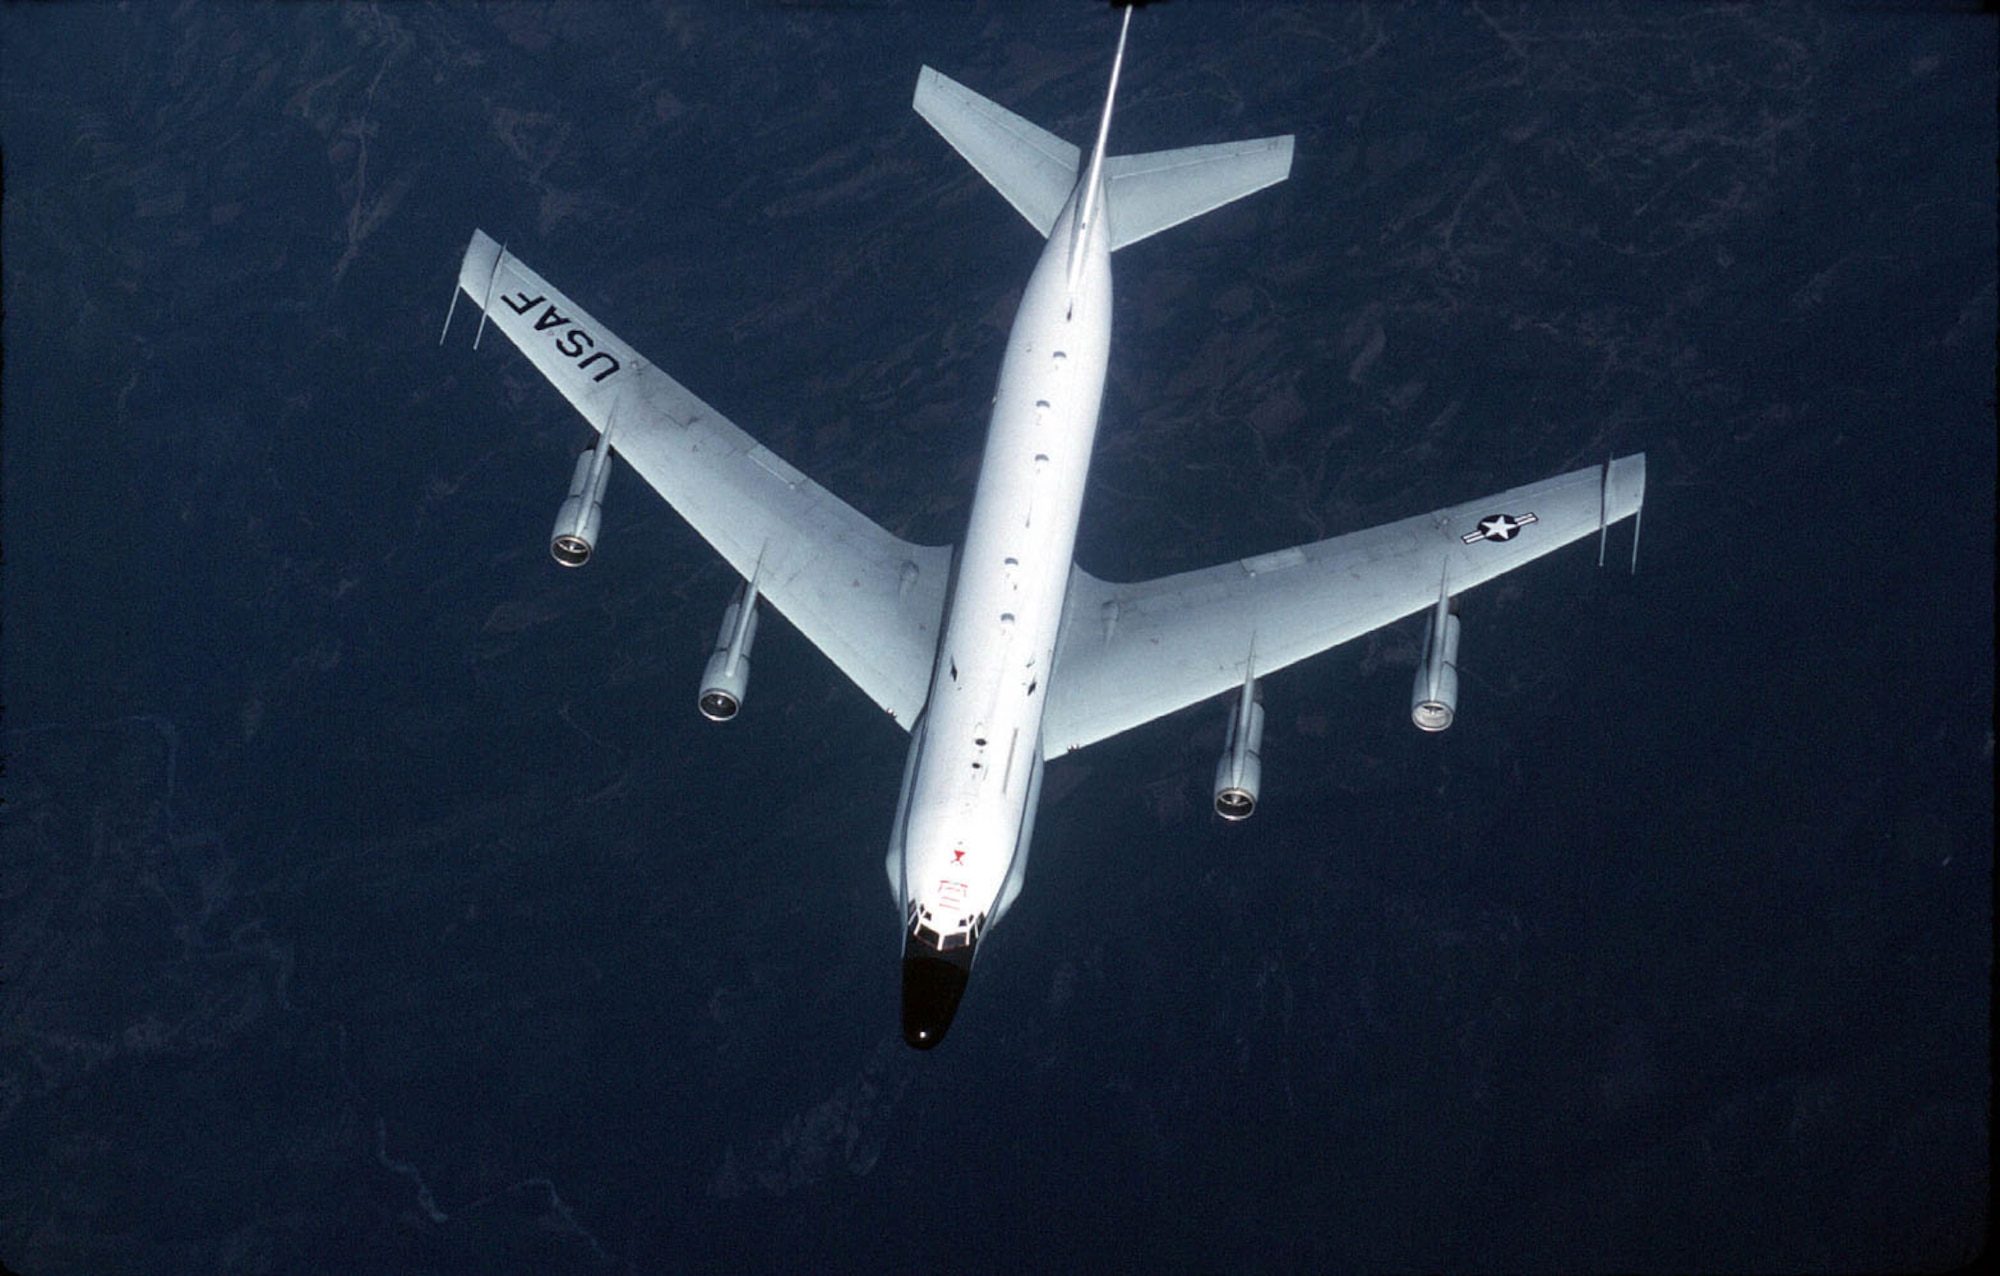 FILE PHOTO -- The basic airframe of the RC-135 resembles that of a slightly larger Boeing 707 from which it is derived. Having a long service career, RC-135s originally flew from remote bases in Alaska and elsewhere to collect data on Soviet ballistic missile testing during the Cold War. With the use of passive sensors, the RC-135 gathers imagery intelligence, telemetry intelligence and signals intelligence. (U.S. Air Force photo by Senior Airman Greg Davis) 
